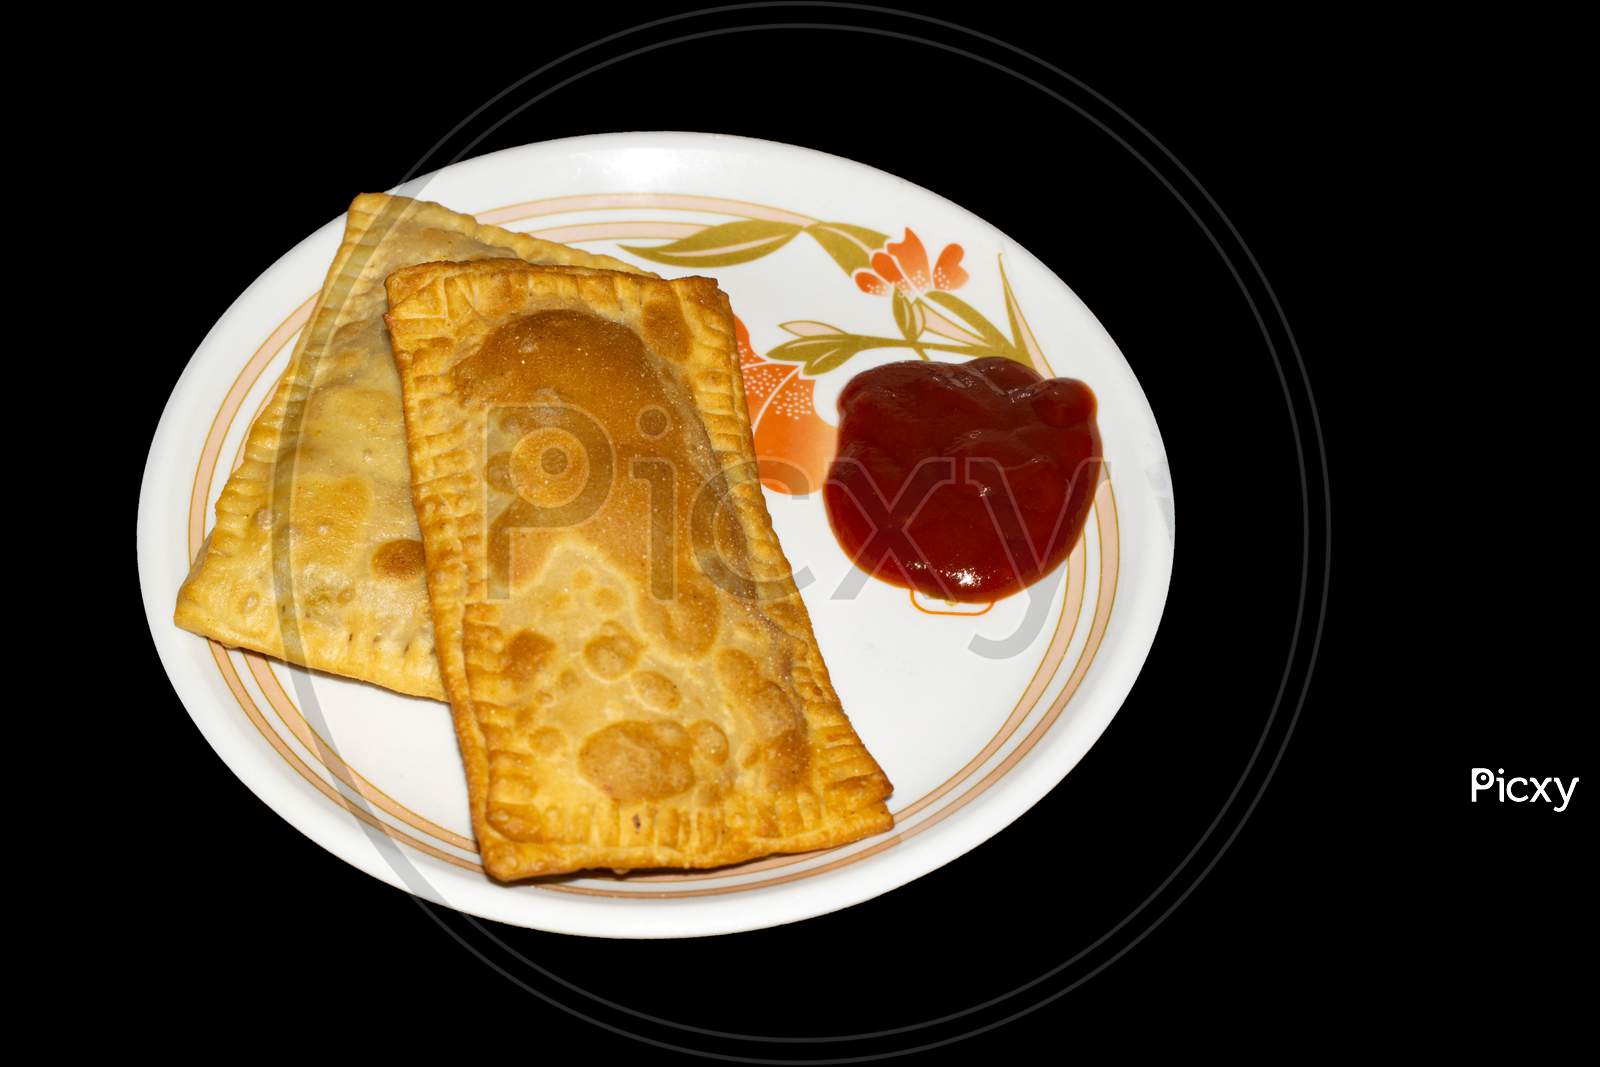 Pizza Puff, Puffed Pizza isolated with Black Background